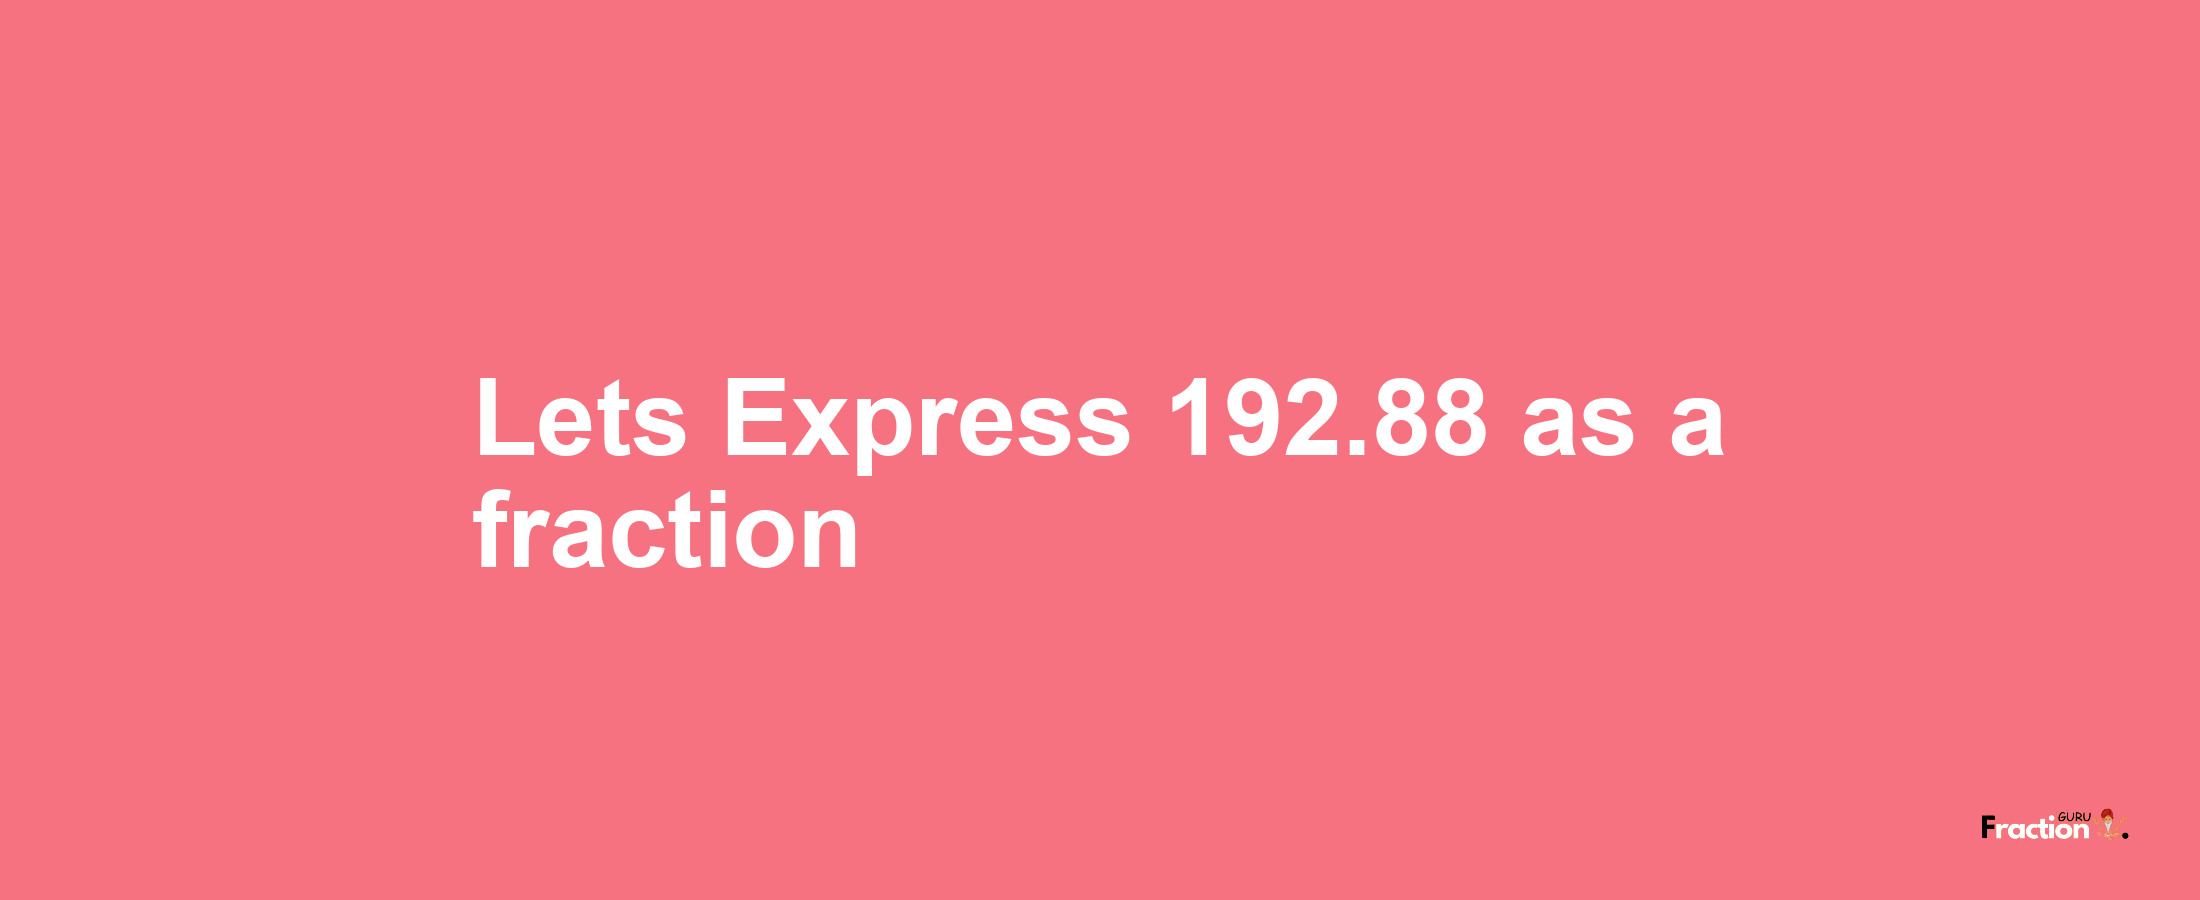 Lets Express 192.88 as afraction